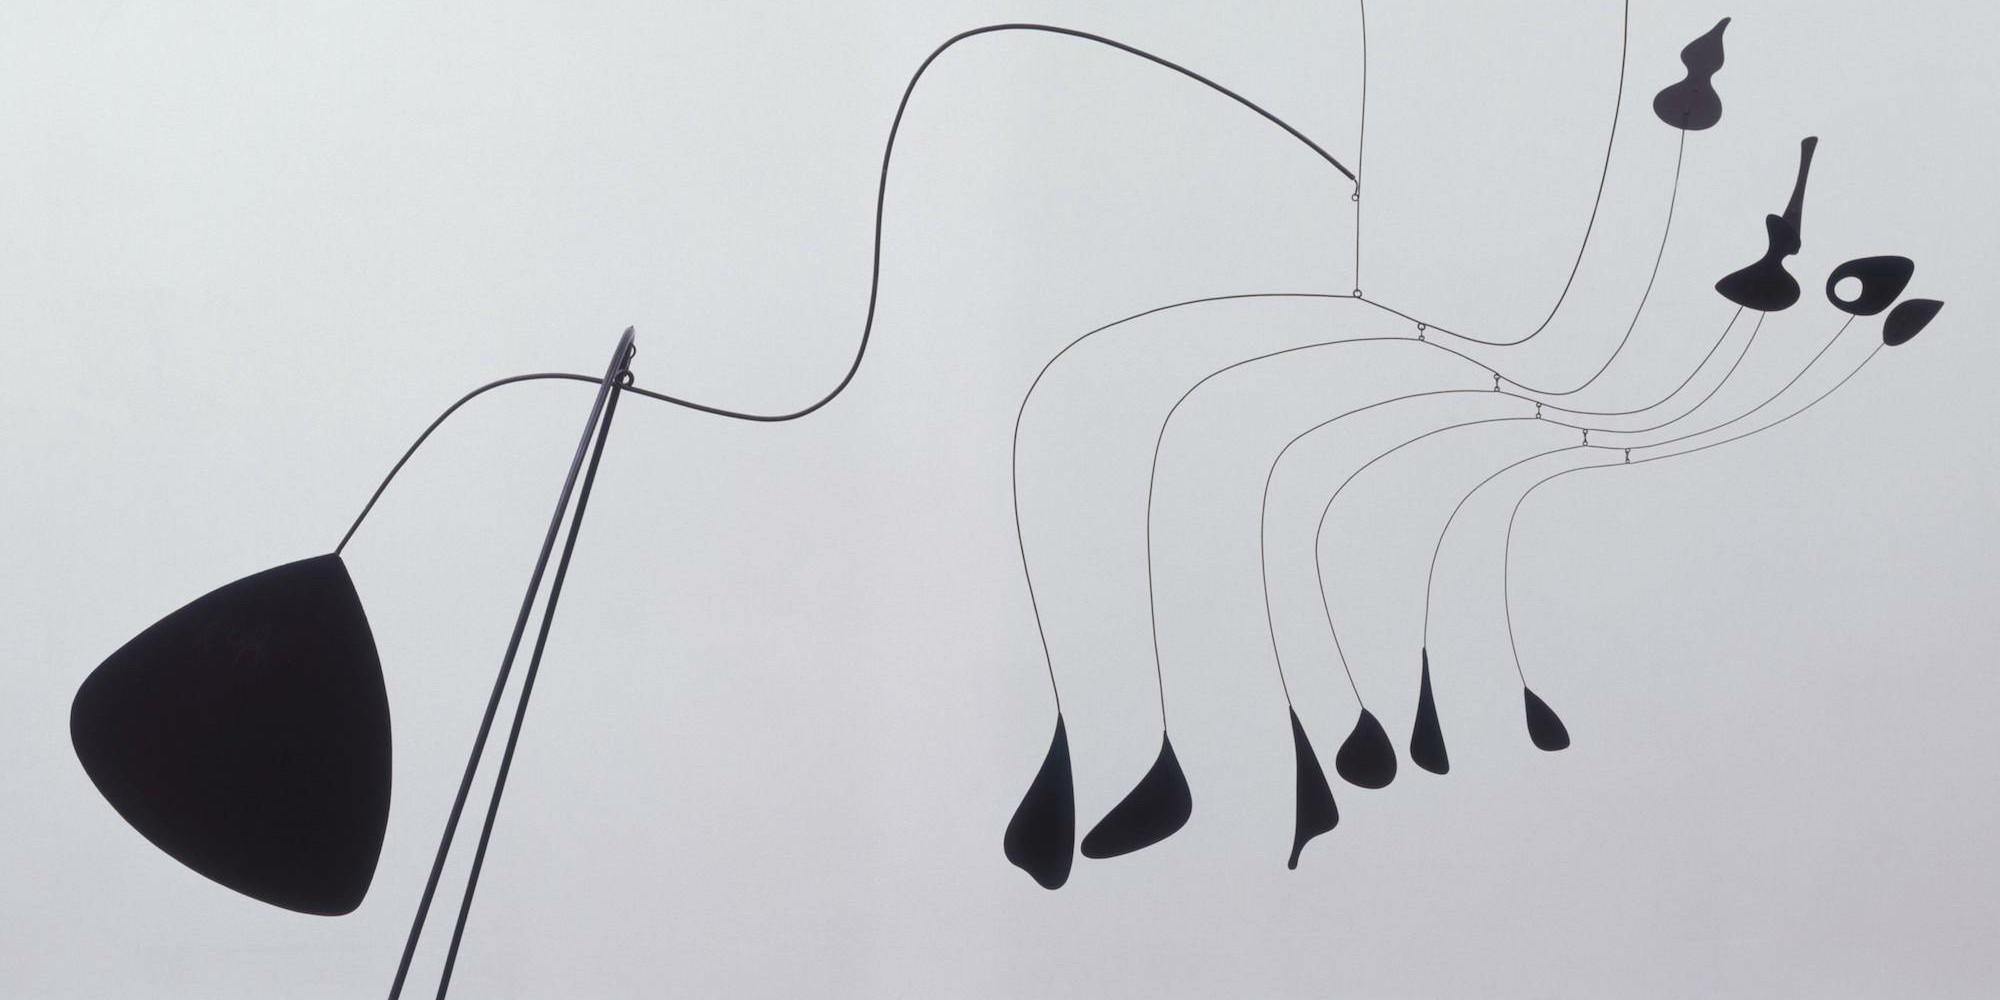 Alexander Calder. Spider (detail). 1939. Painted sheet aluminum, steel rod, and steel wire, 6&#39; 8 1/2&#34; × 7&#39; 4 1/2&#34; × 36 1/2&#34; (203.5 × 224.5 × 92.6 cm). Gift of the artist. © 2021 Calder Foundation, New York/Artists Rights Society (ARS), New York